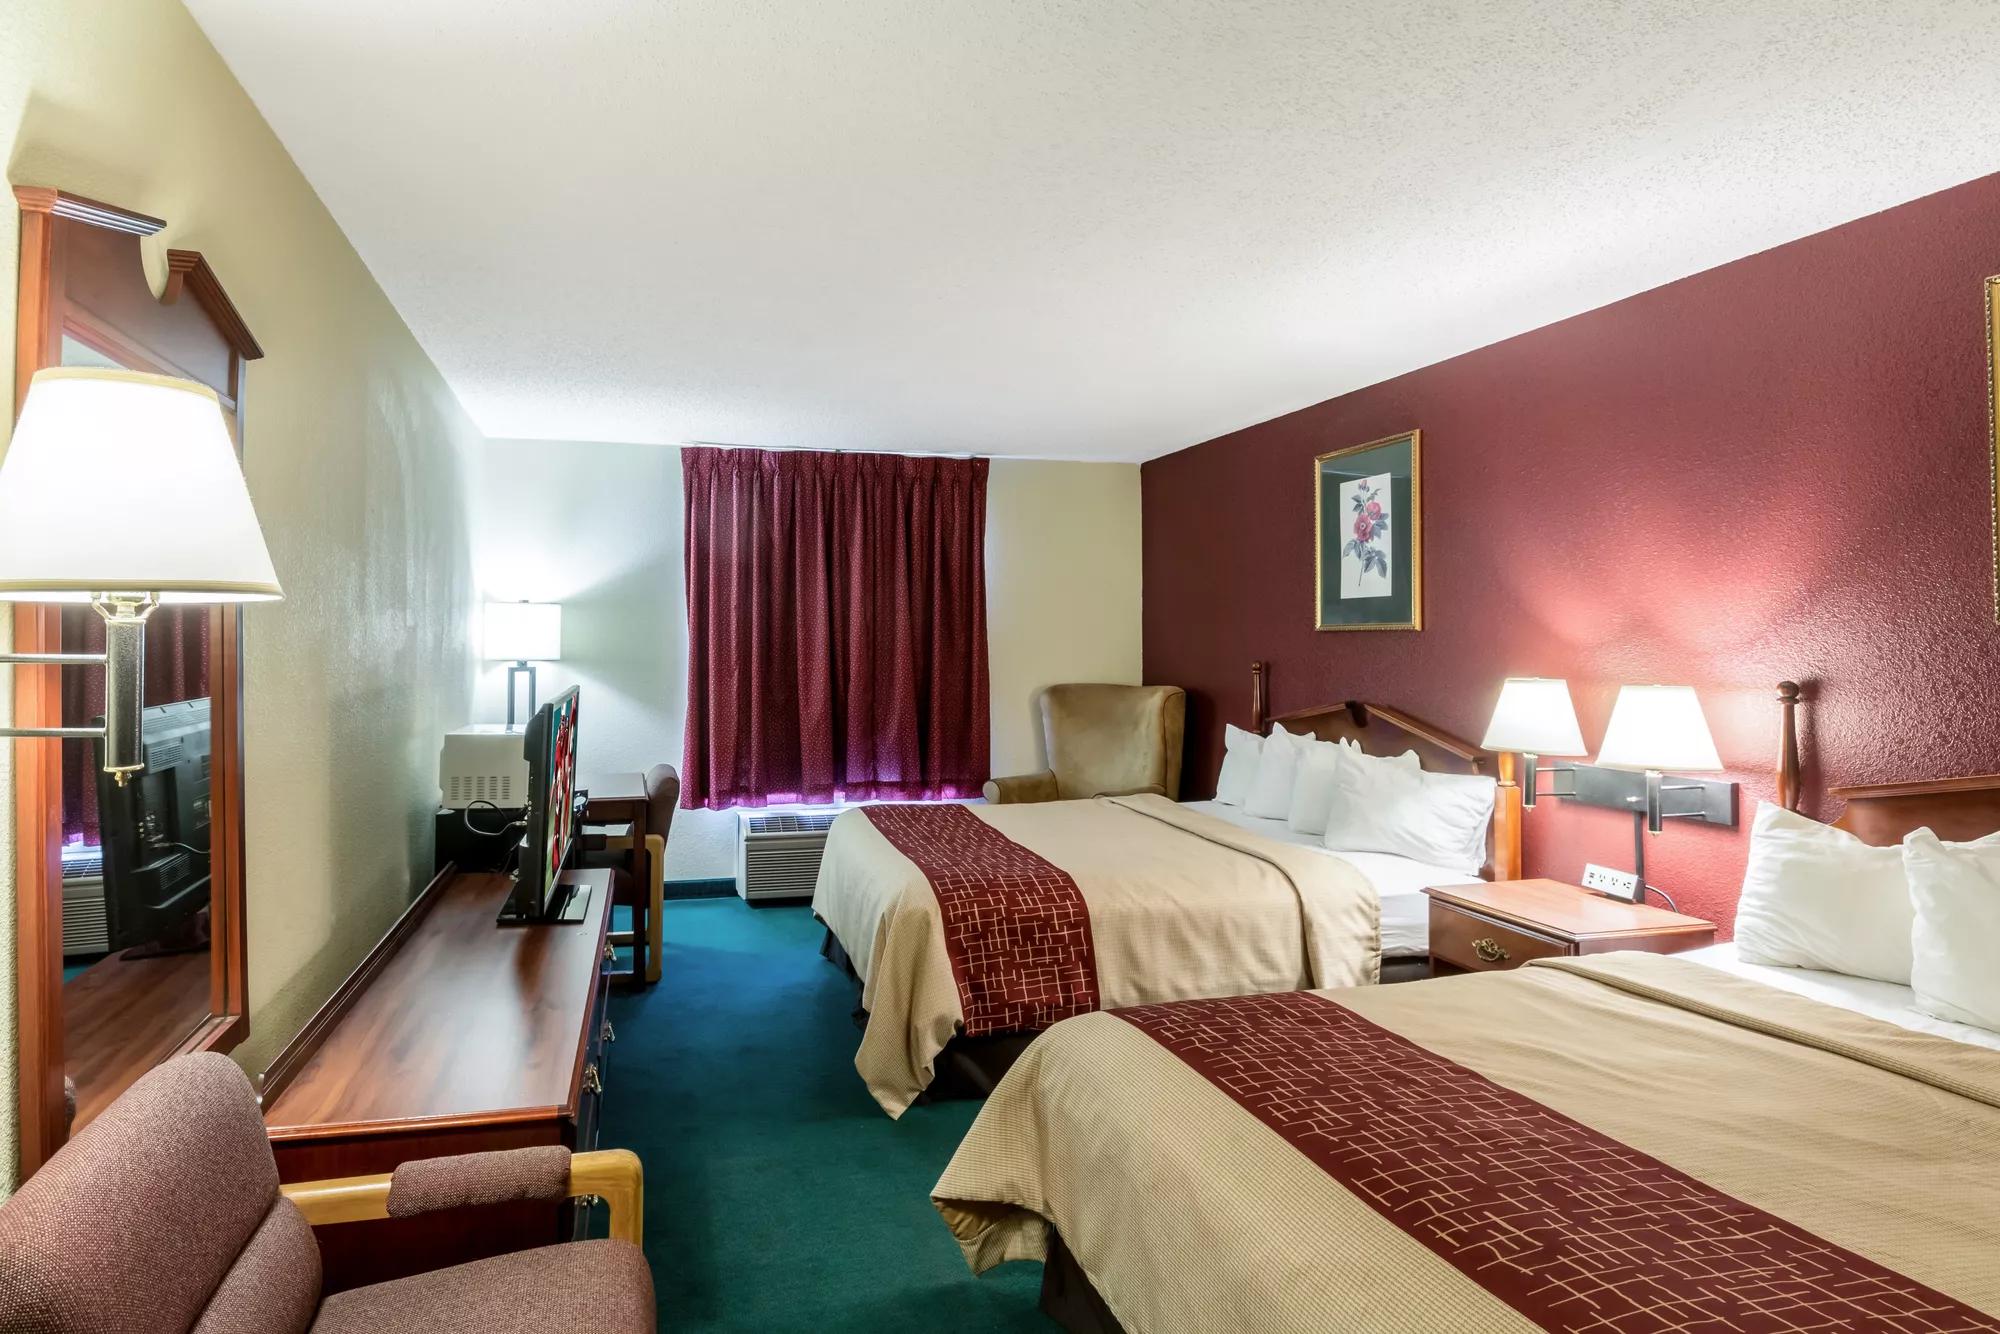 Red Roof Inn Morehead Double Bed Room Image Details